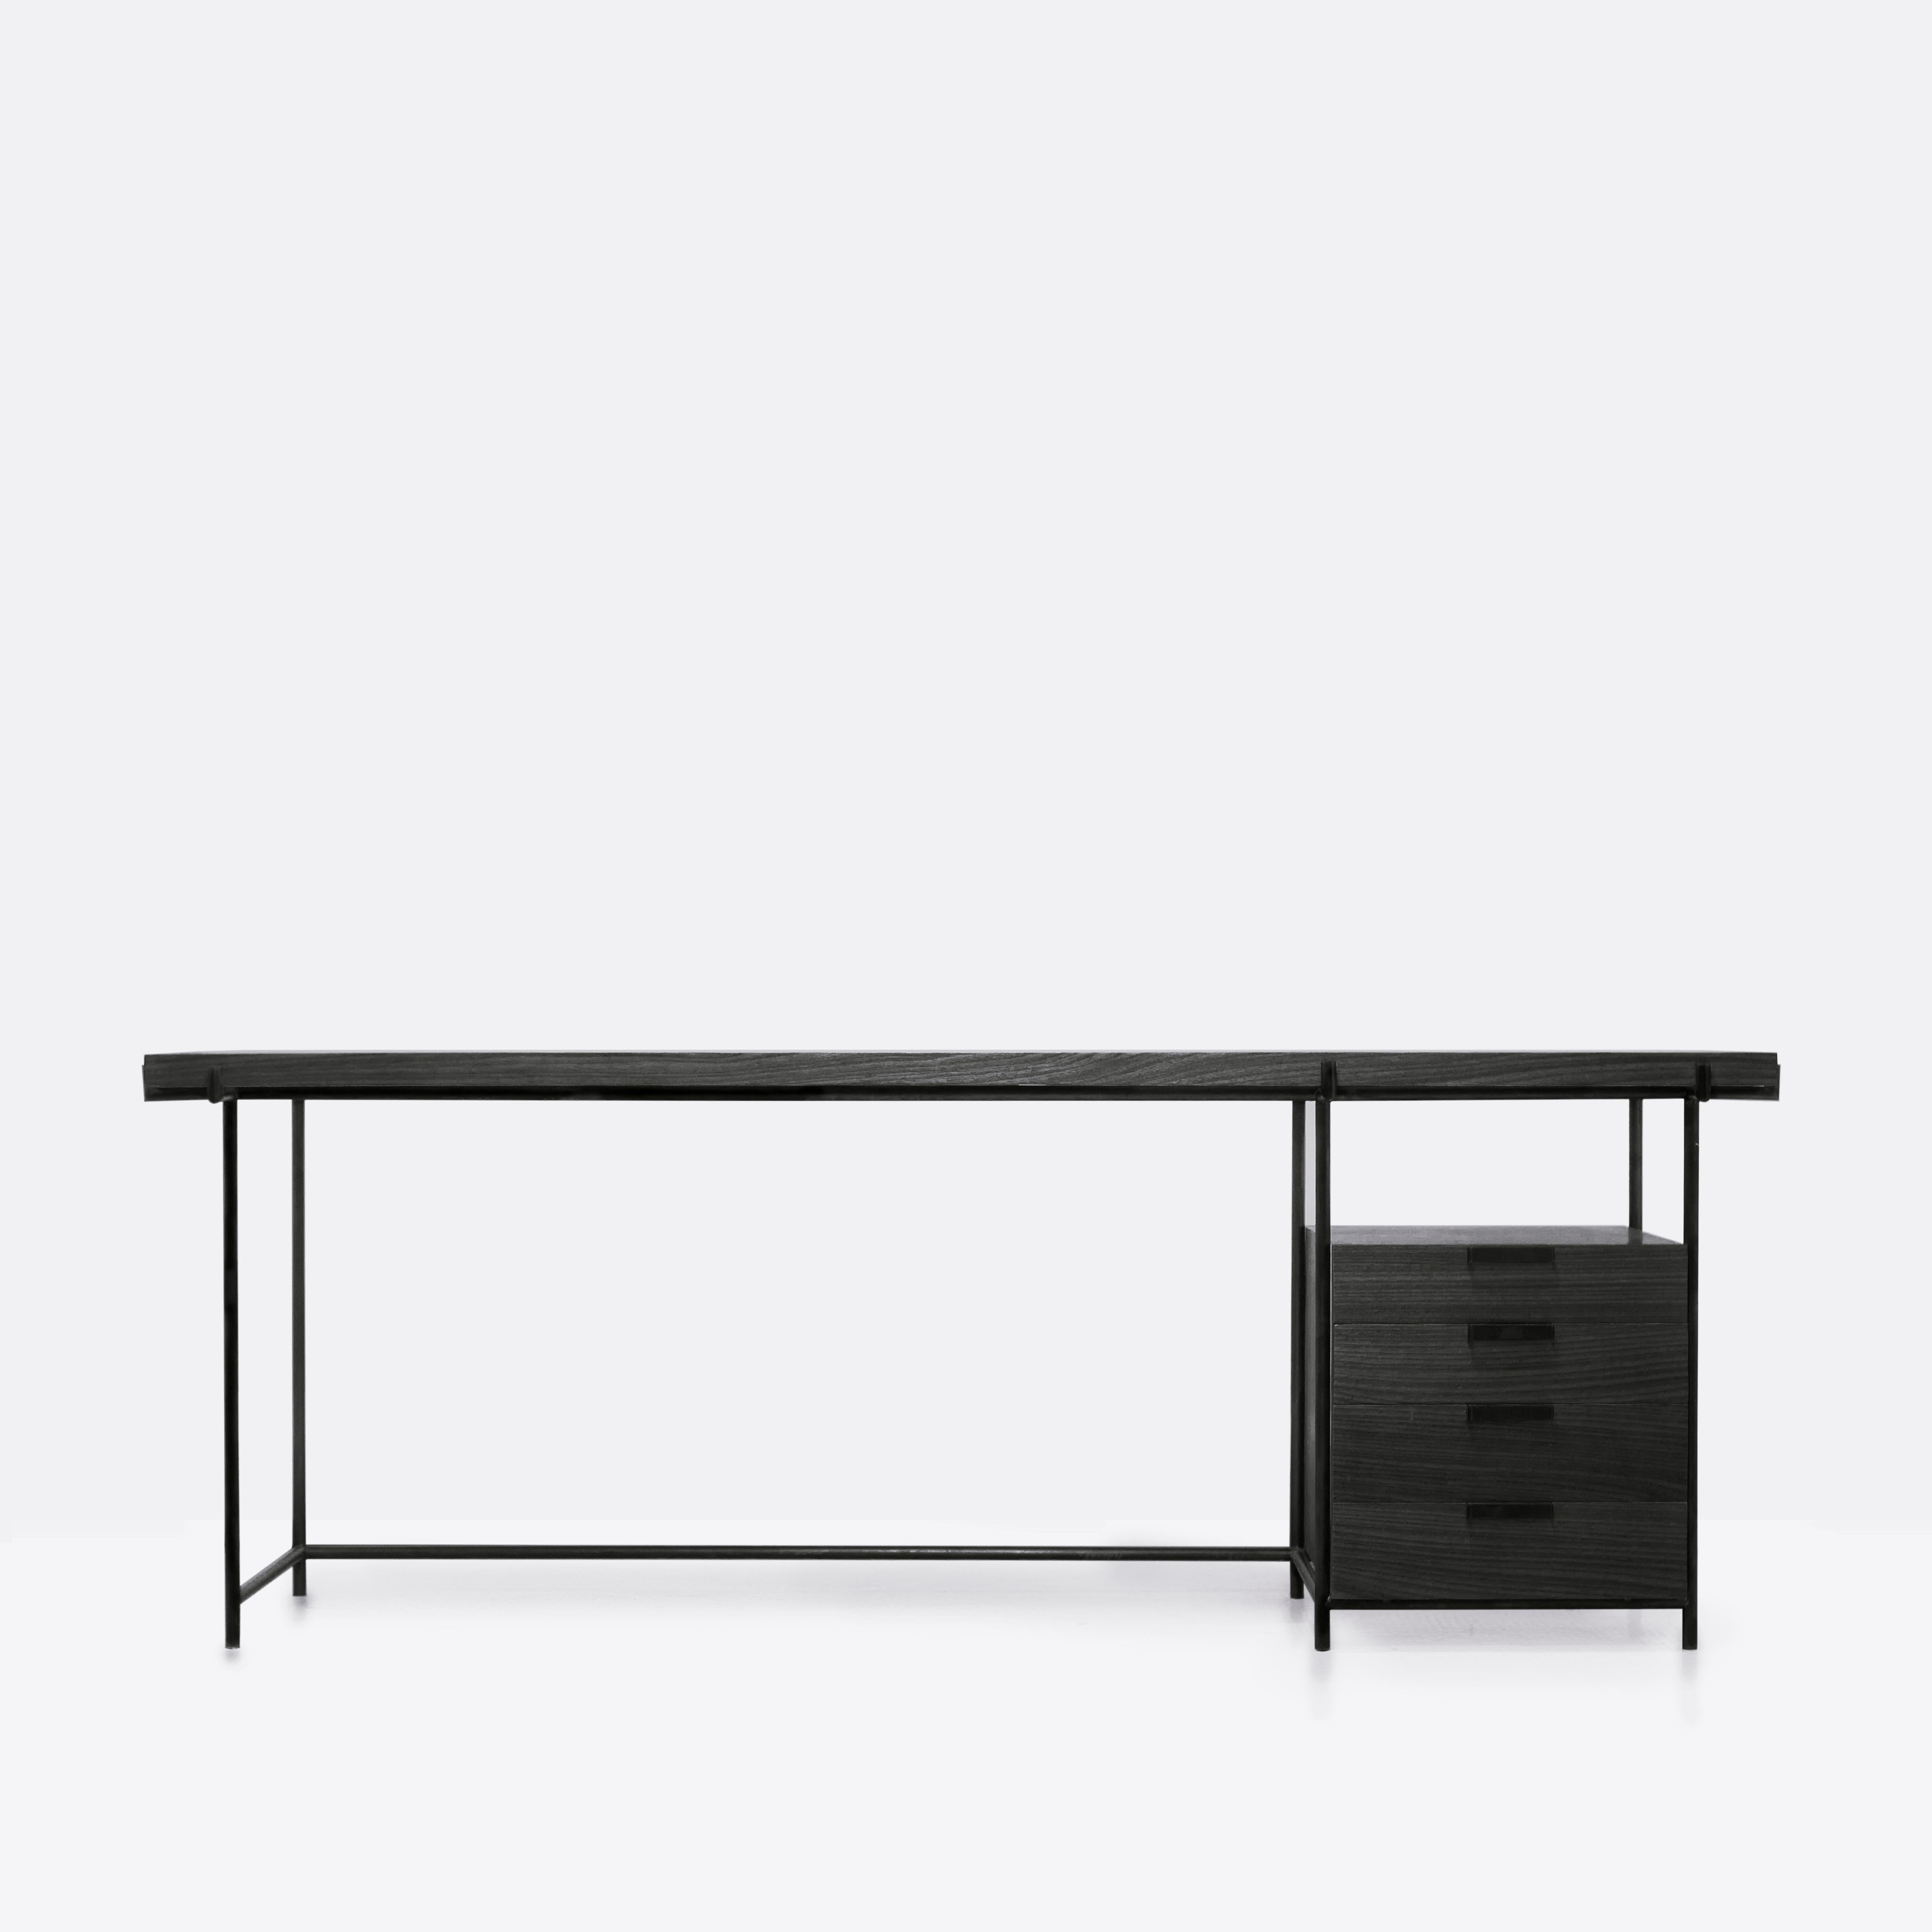 Marajoara black desk with drawers and files is a study on Mid-Century Modern utilitarian furniture, suited for home office, with Brazilian Native Arte Reference. Available Now.

Modern design is still one of the most influential movements in